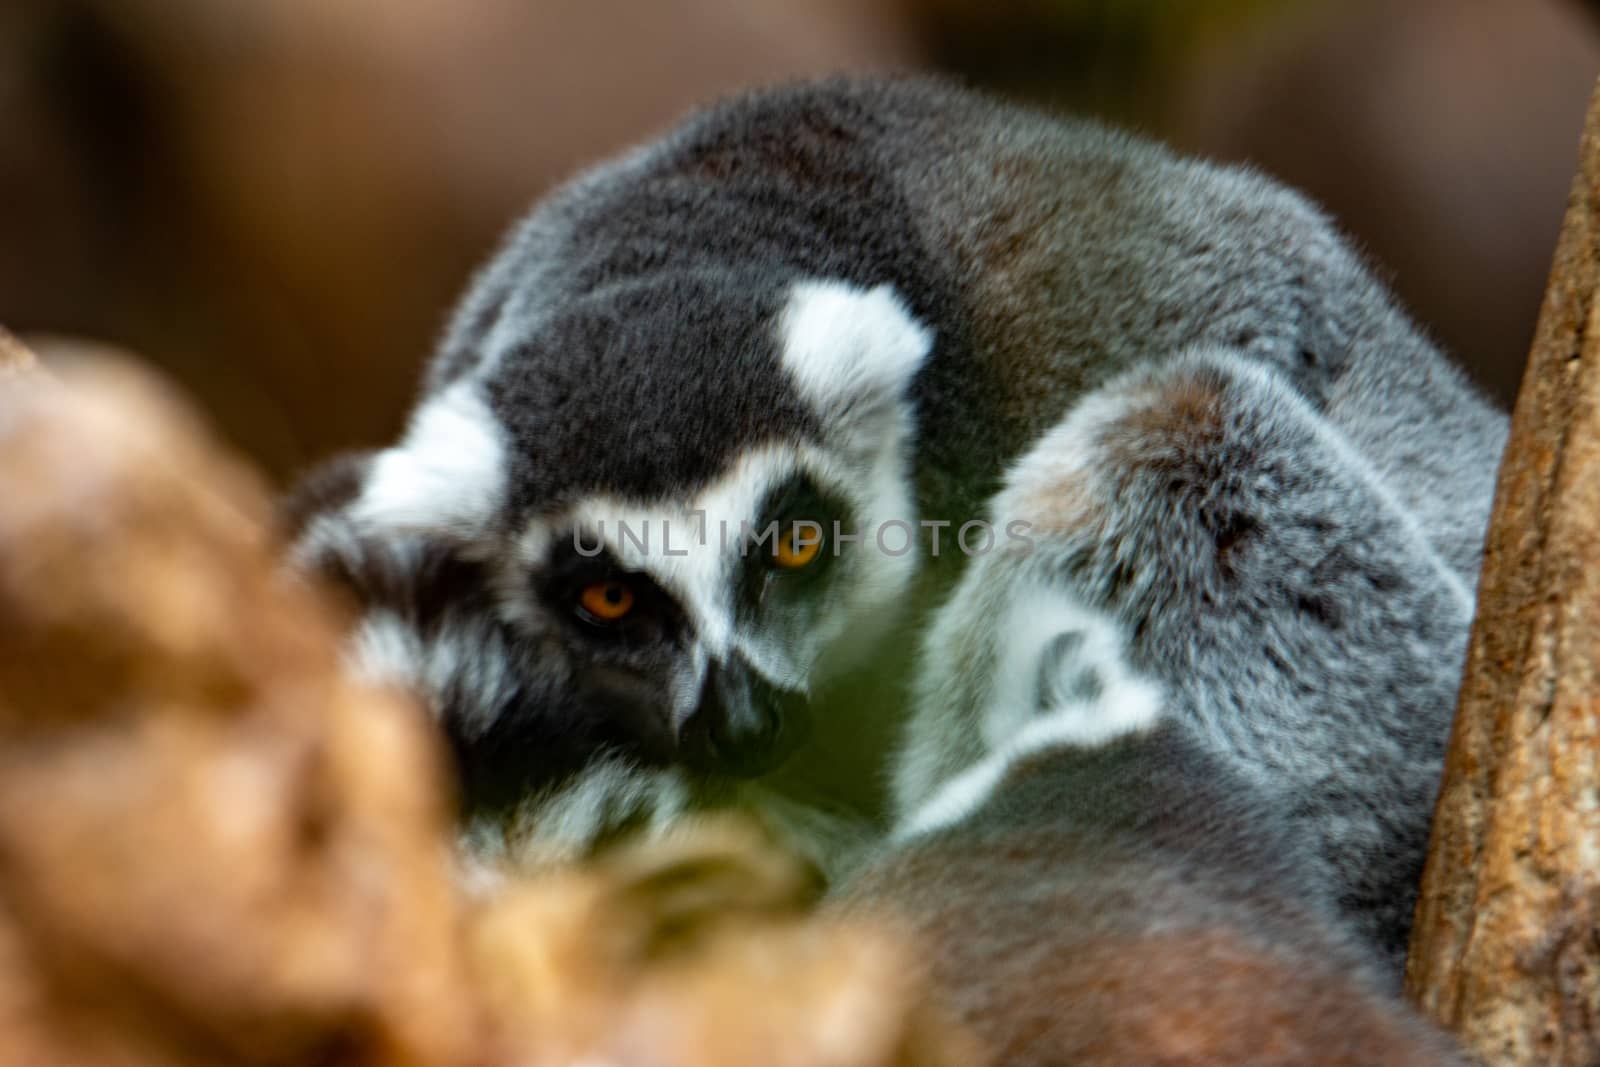 Ring-tailed lemurs (Lemur catta) huddle together on a cold autumn morning to stay warm by mynewturtle1